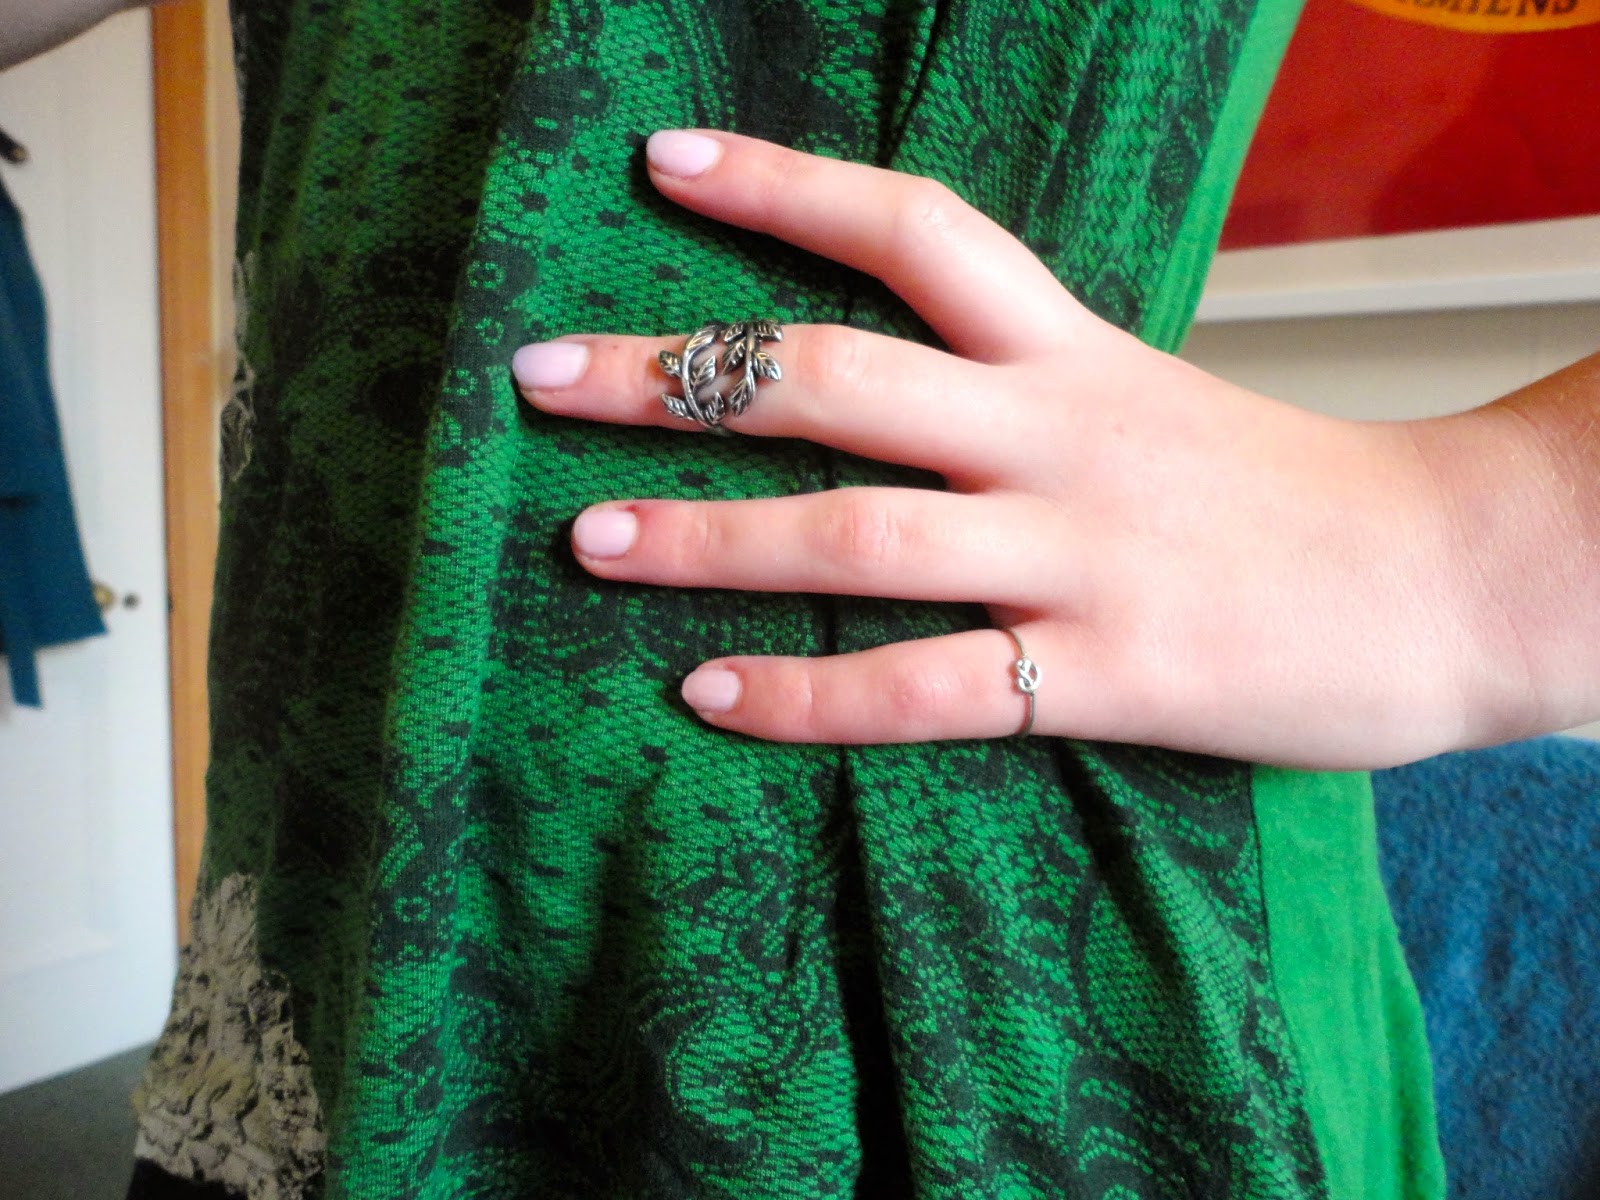 Green patterned top with hand wearing silver leaf & knot rings and pink nail polish